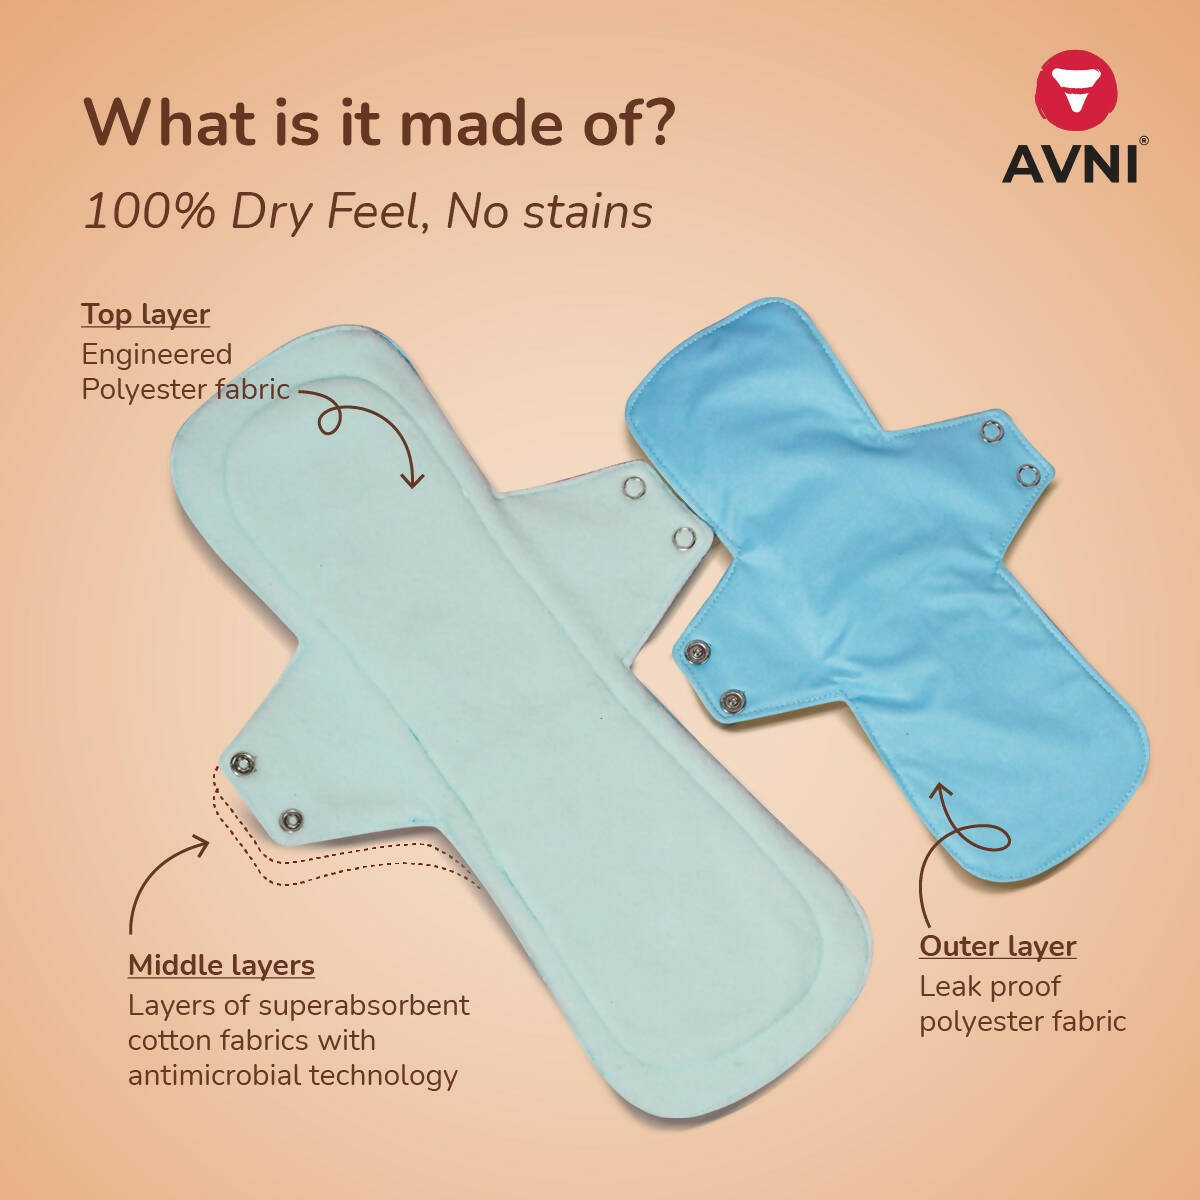 Avni Fluff Washable Cloth Pads, 1 R + 1 L (1 X 240MM + 1 X 280MM, Pack of 2) + Avni Plant Based Liquid Detergent, Period/Inner Wear Wash- 100ml (Combo Pack of 3) Wemy Store